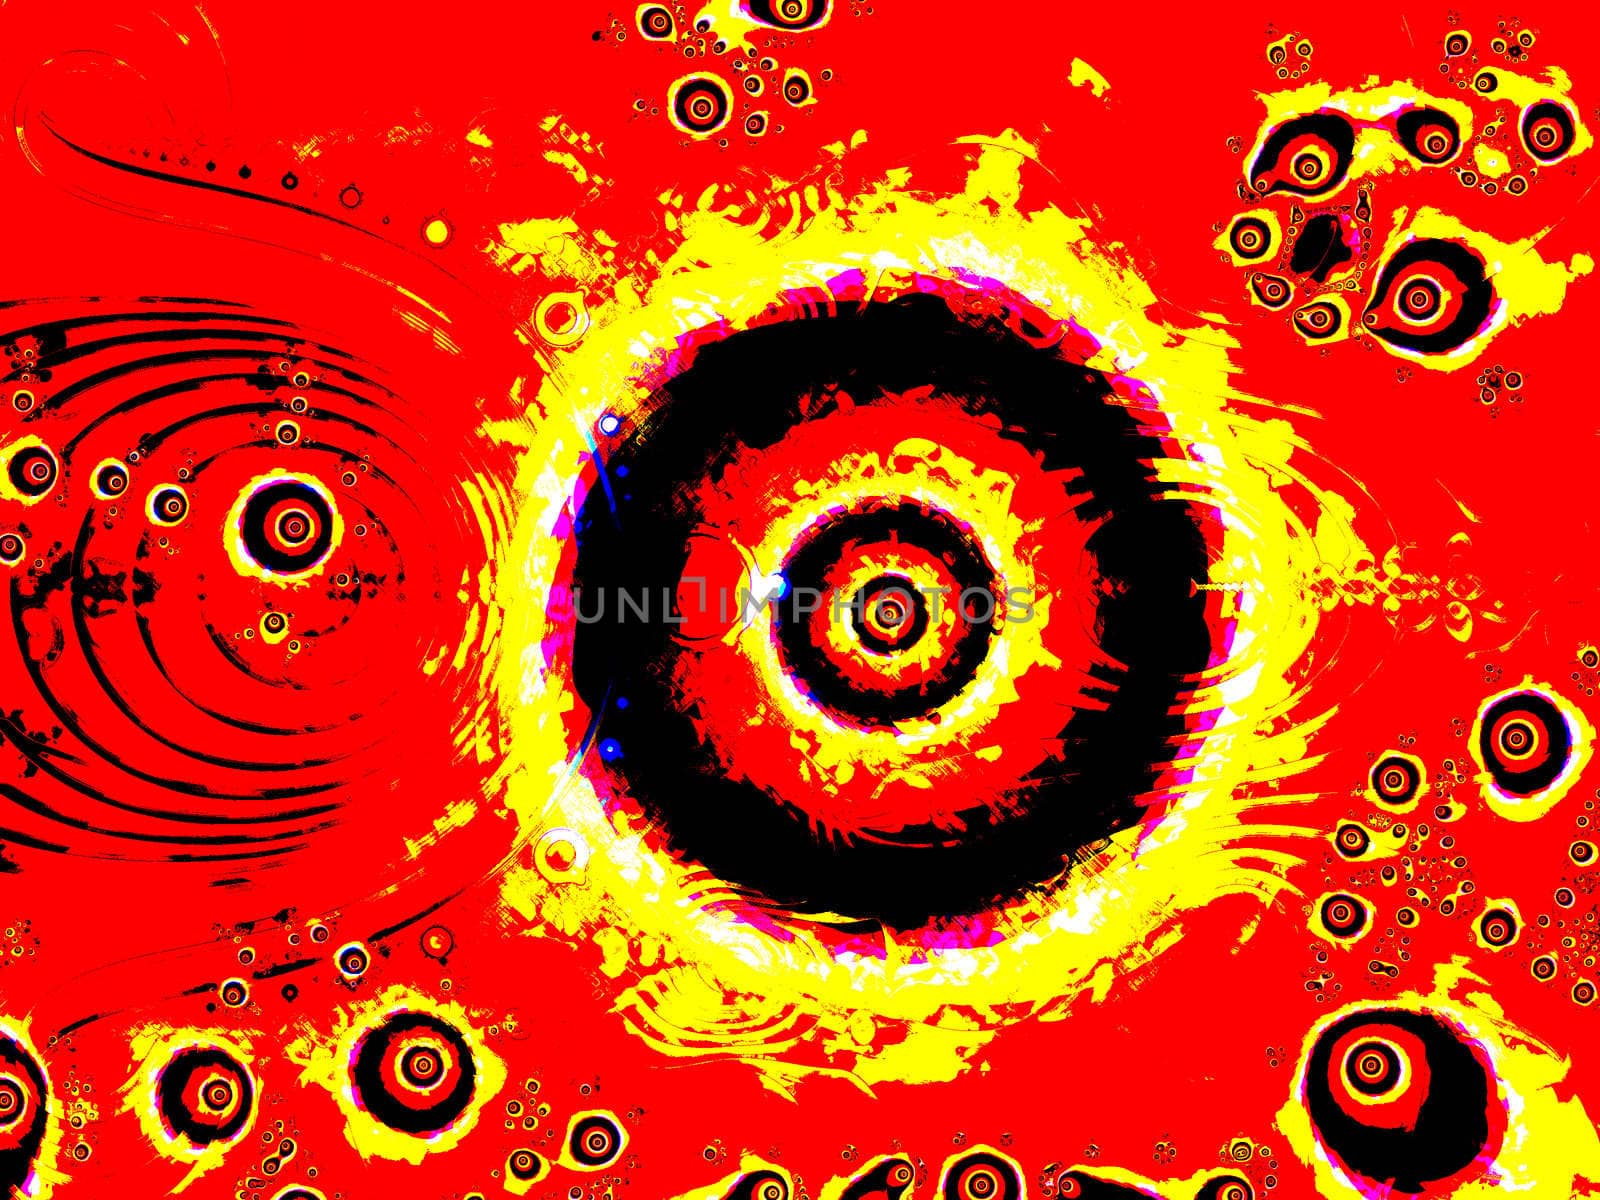 Firey Eye Fractal Design With Strong Circles by bobbigmac